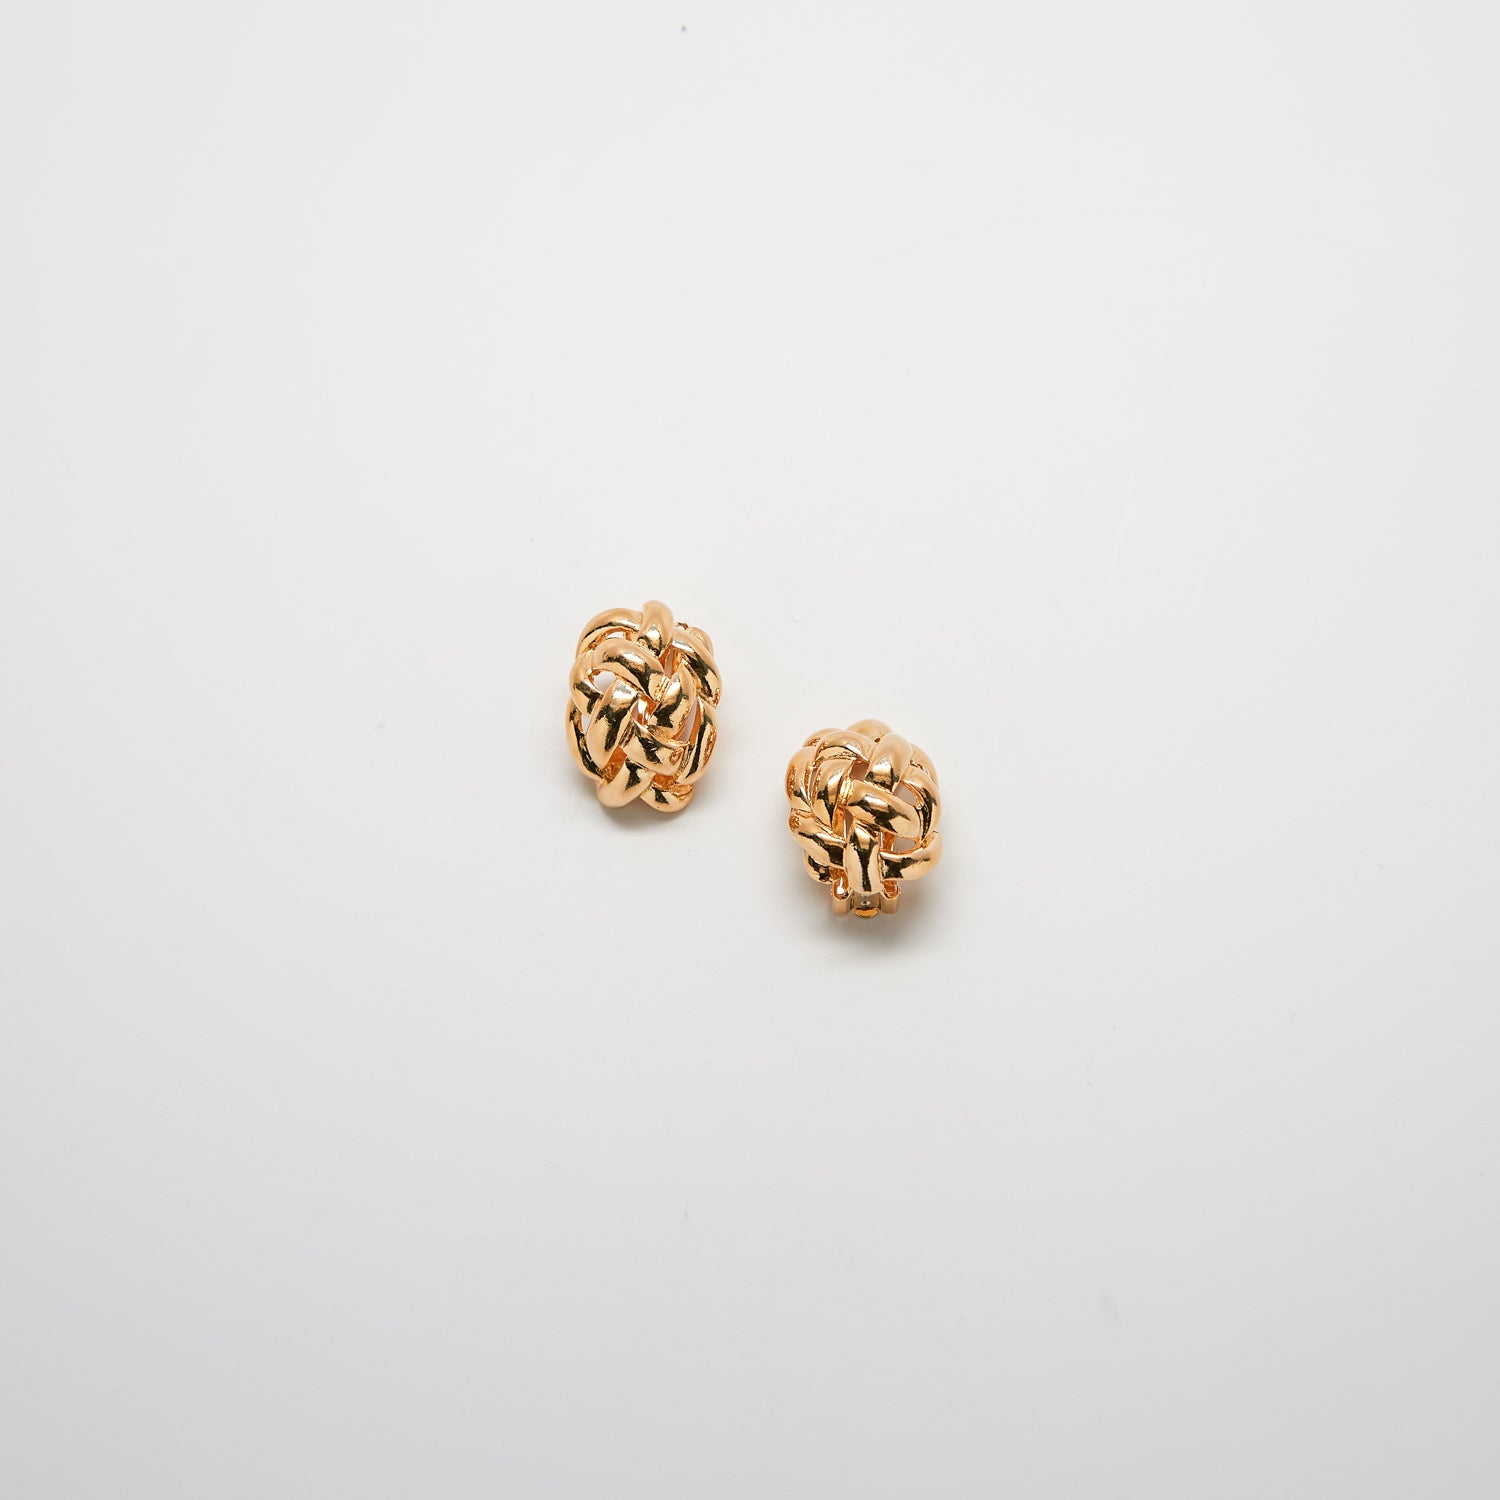 Vintage Gold Woven Dome Earrings